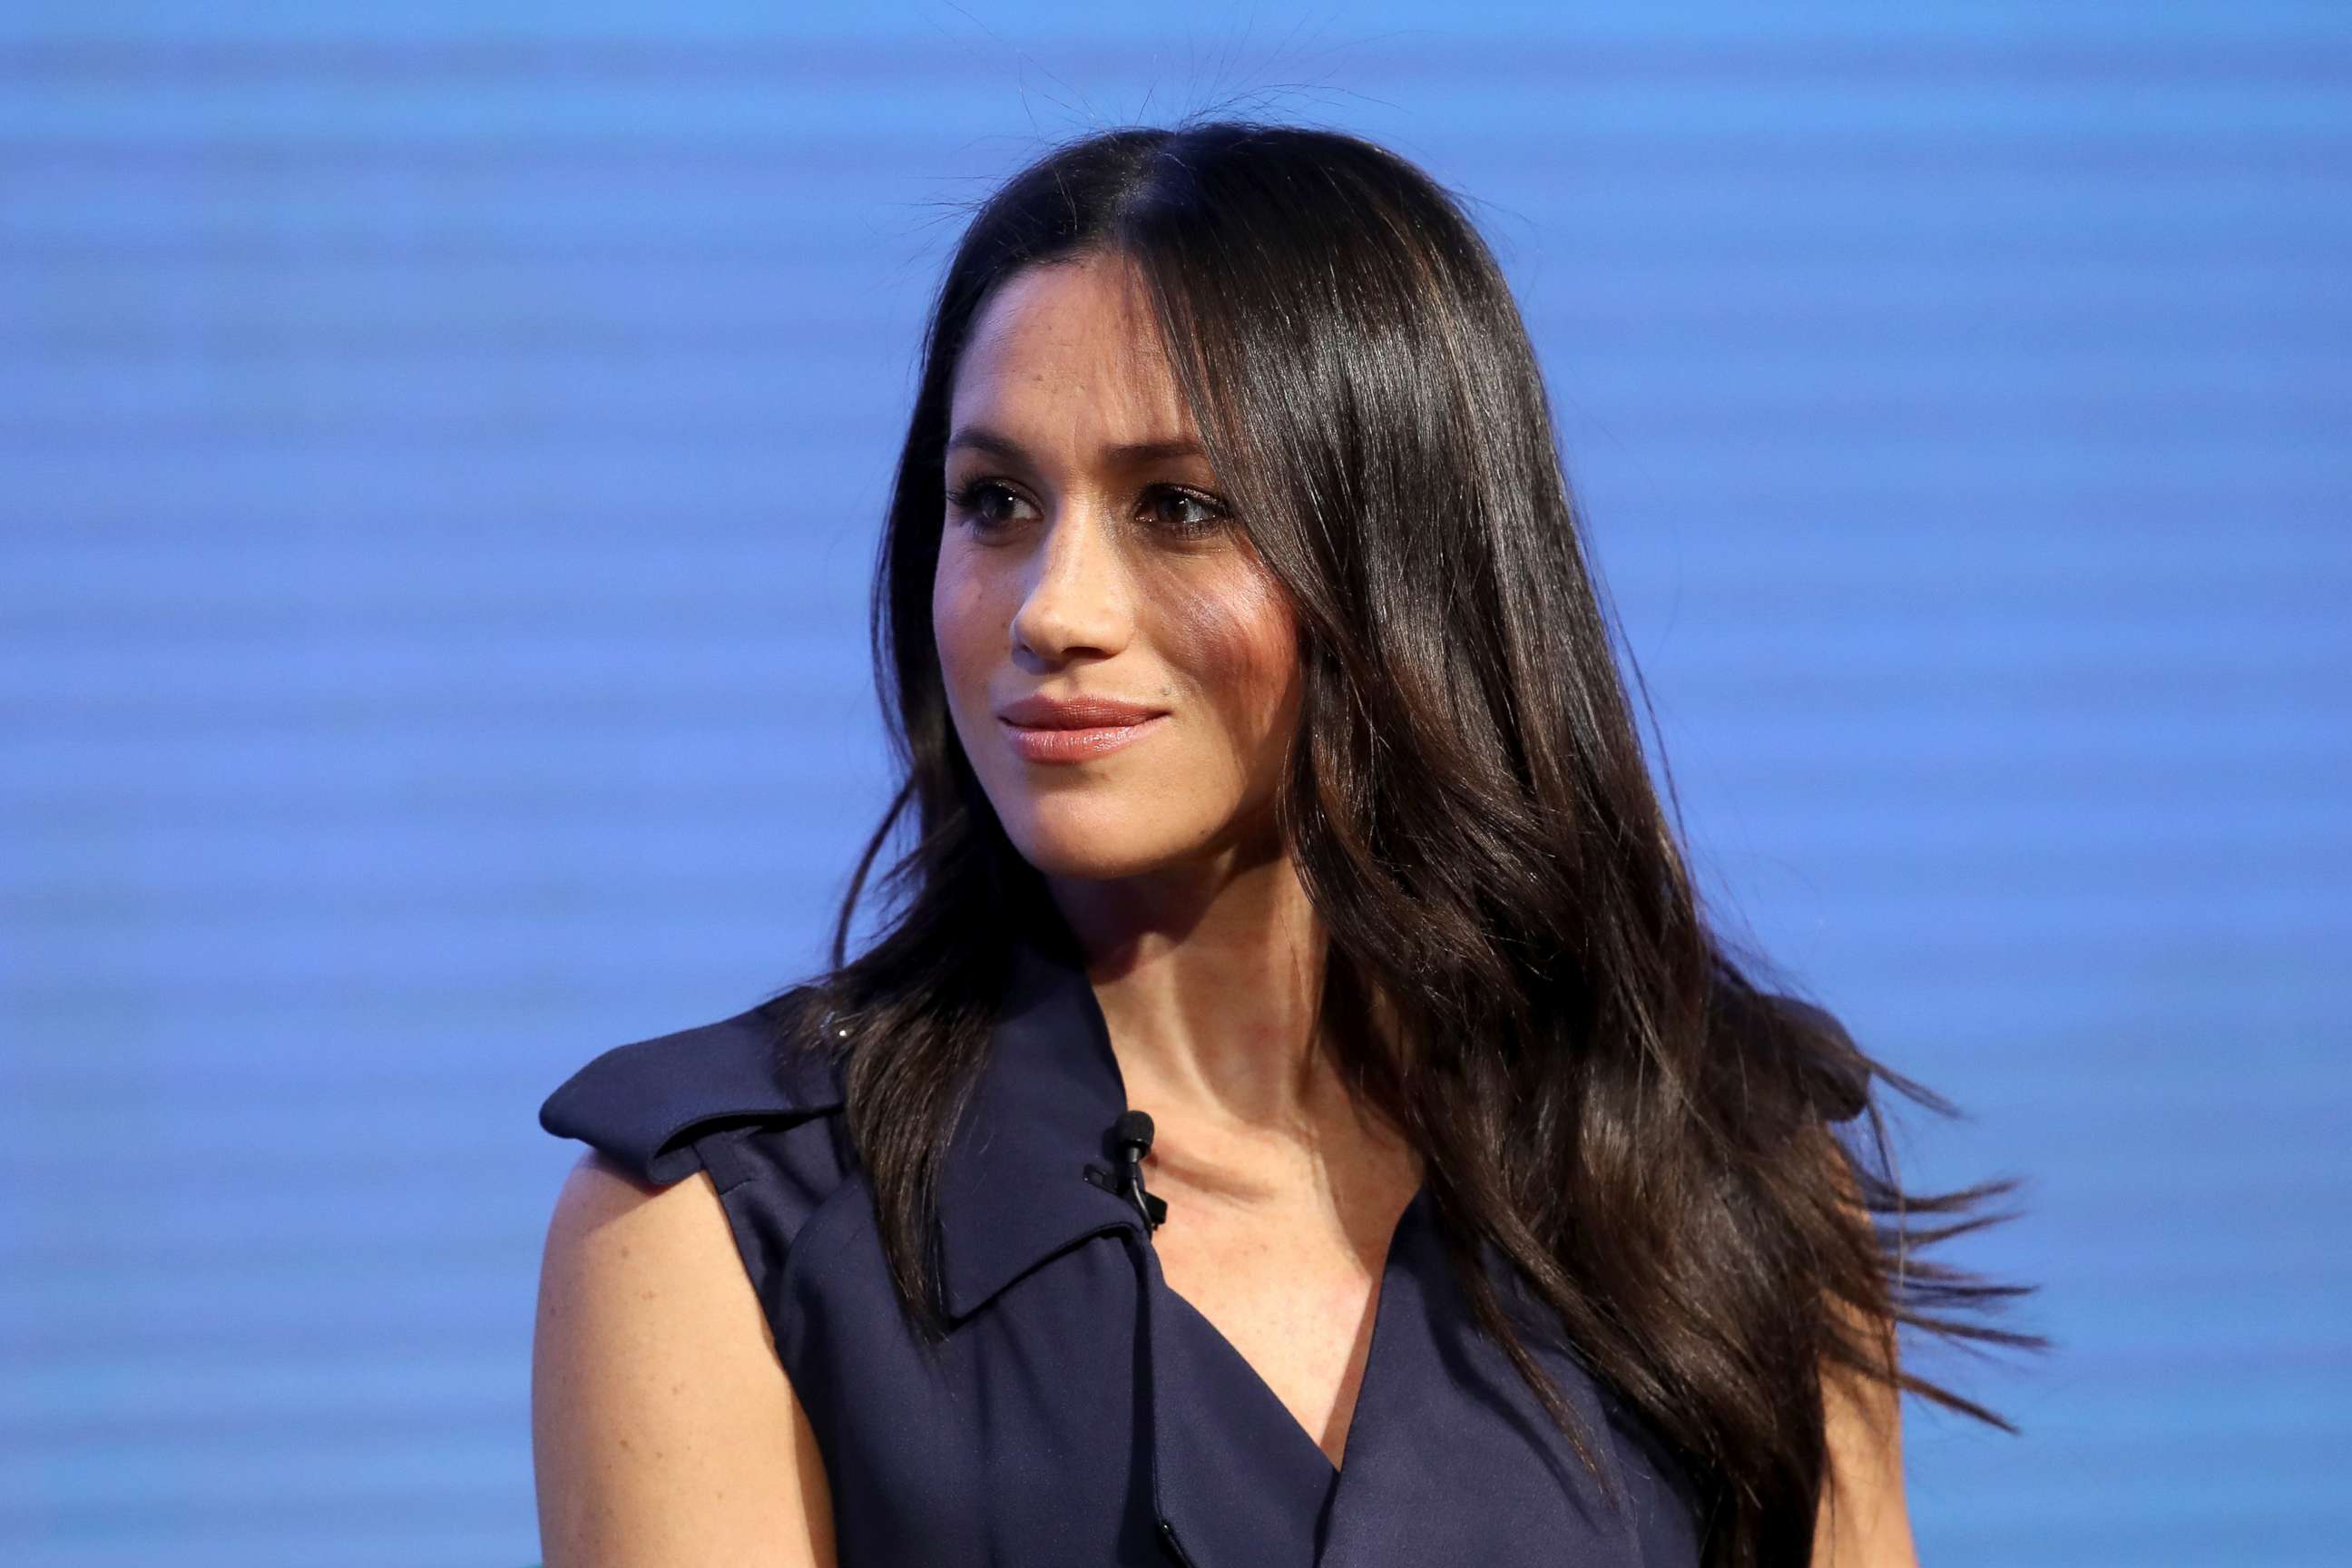 PHOTO: Meghan Markle attends the first annual Royal Foundation Forum held at Aviva, Feb. 28, 2018, in London.